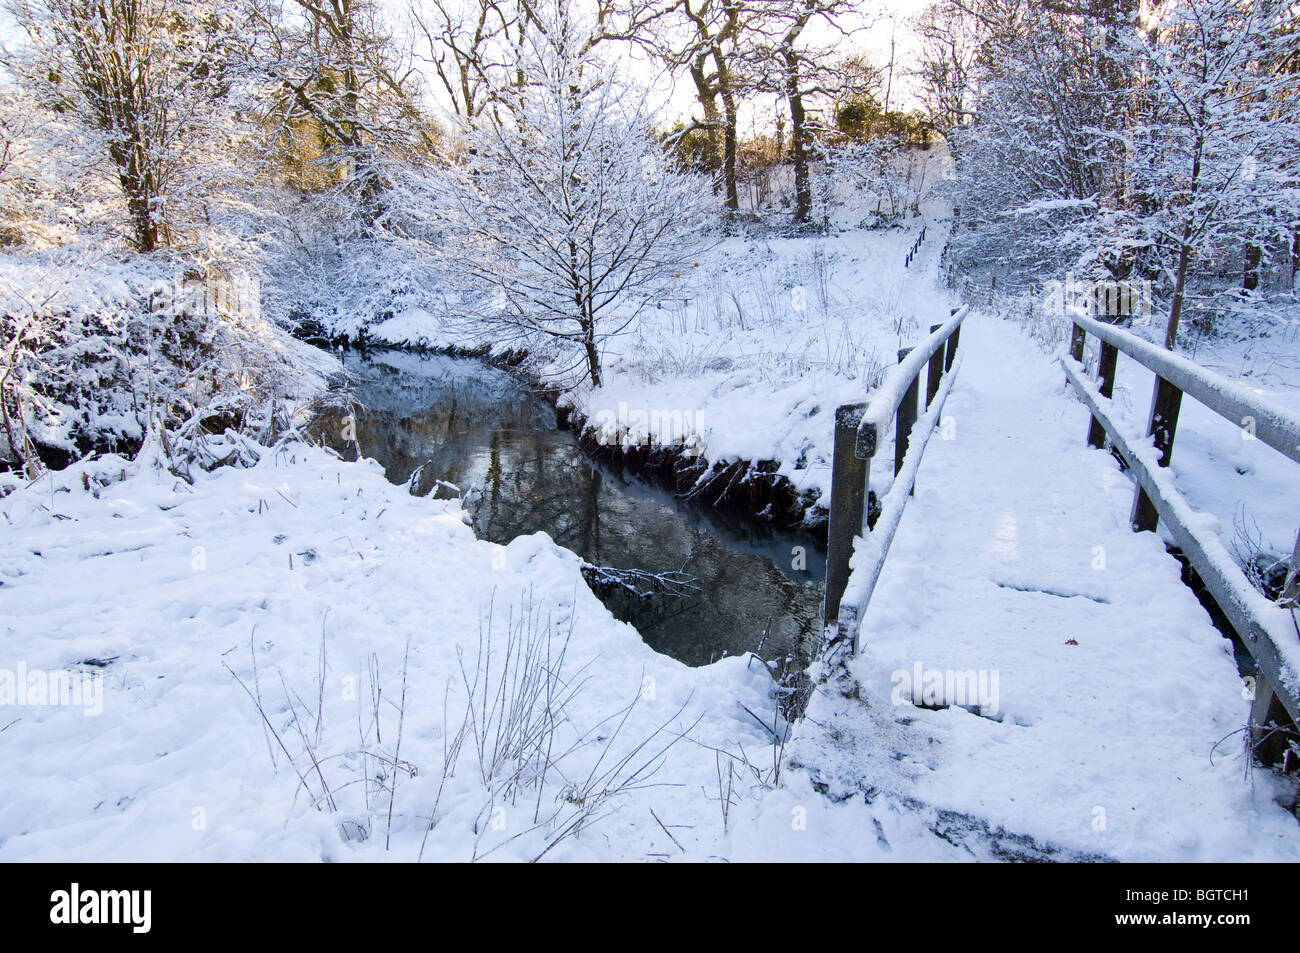 A makeshift wooden bridge taking a footpath over a small river during the winter with fresh snow on the ground. Stock Photo